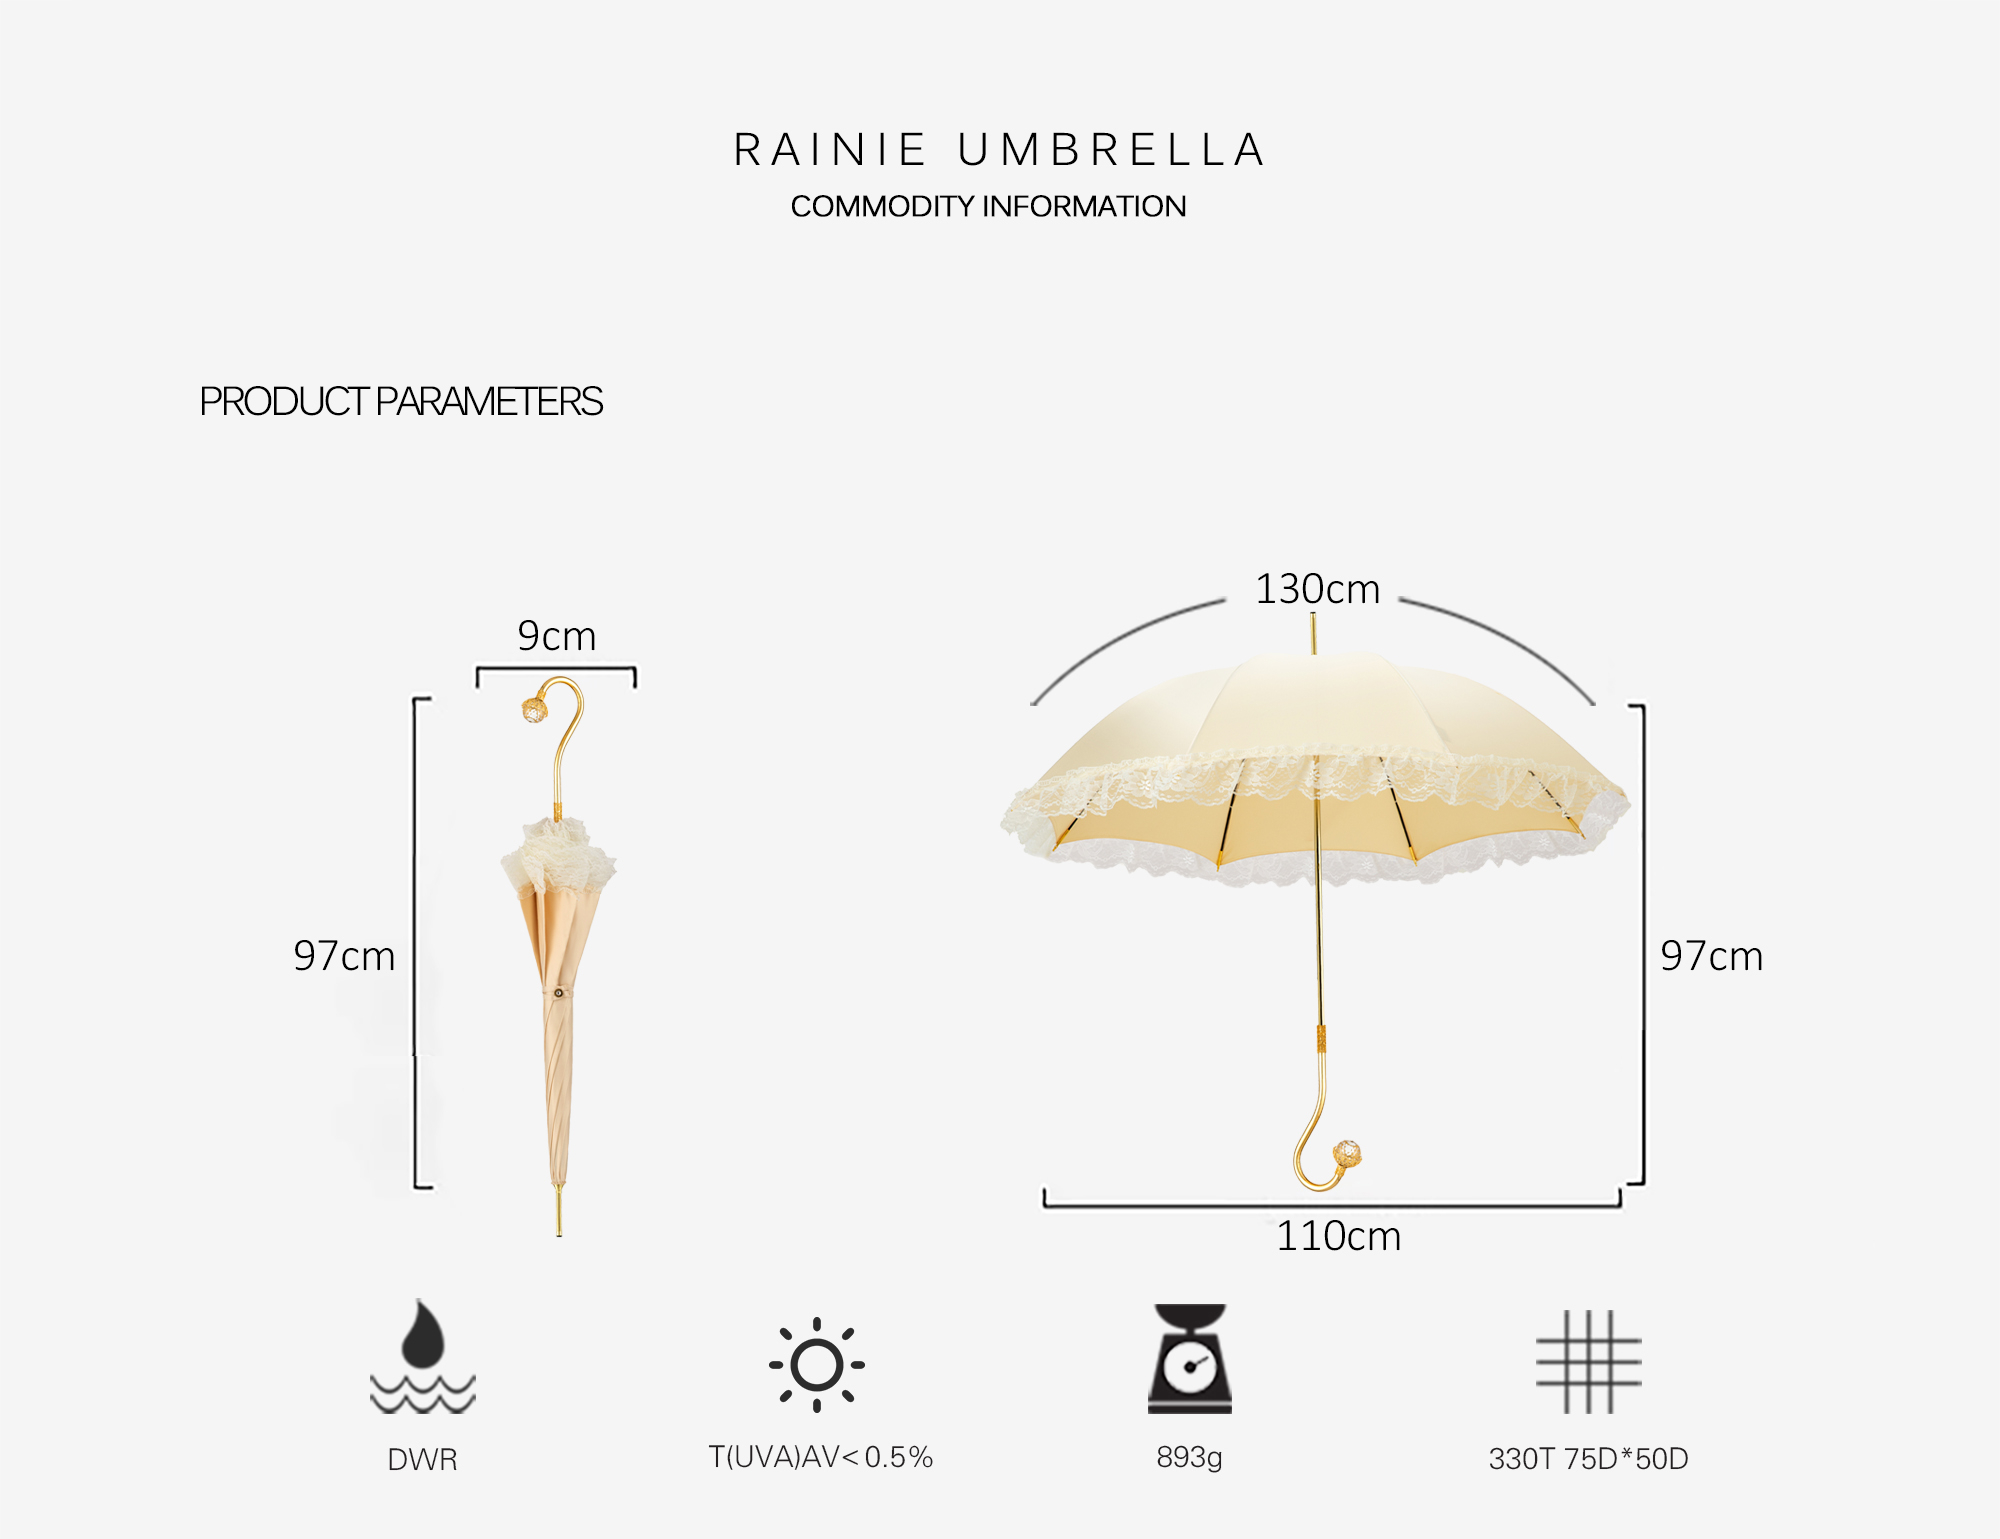 Exquisite crystal umbrella with long handle